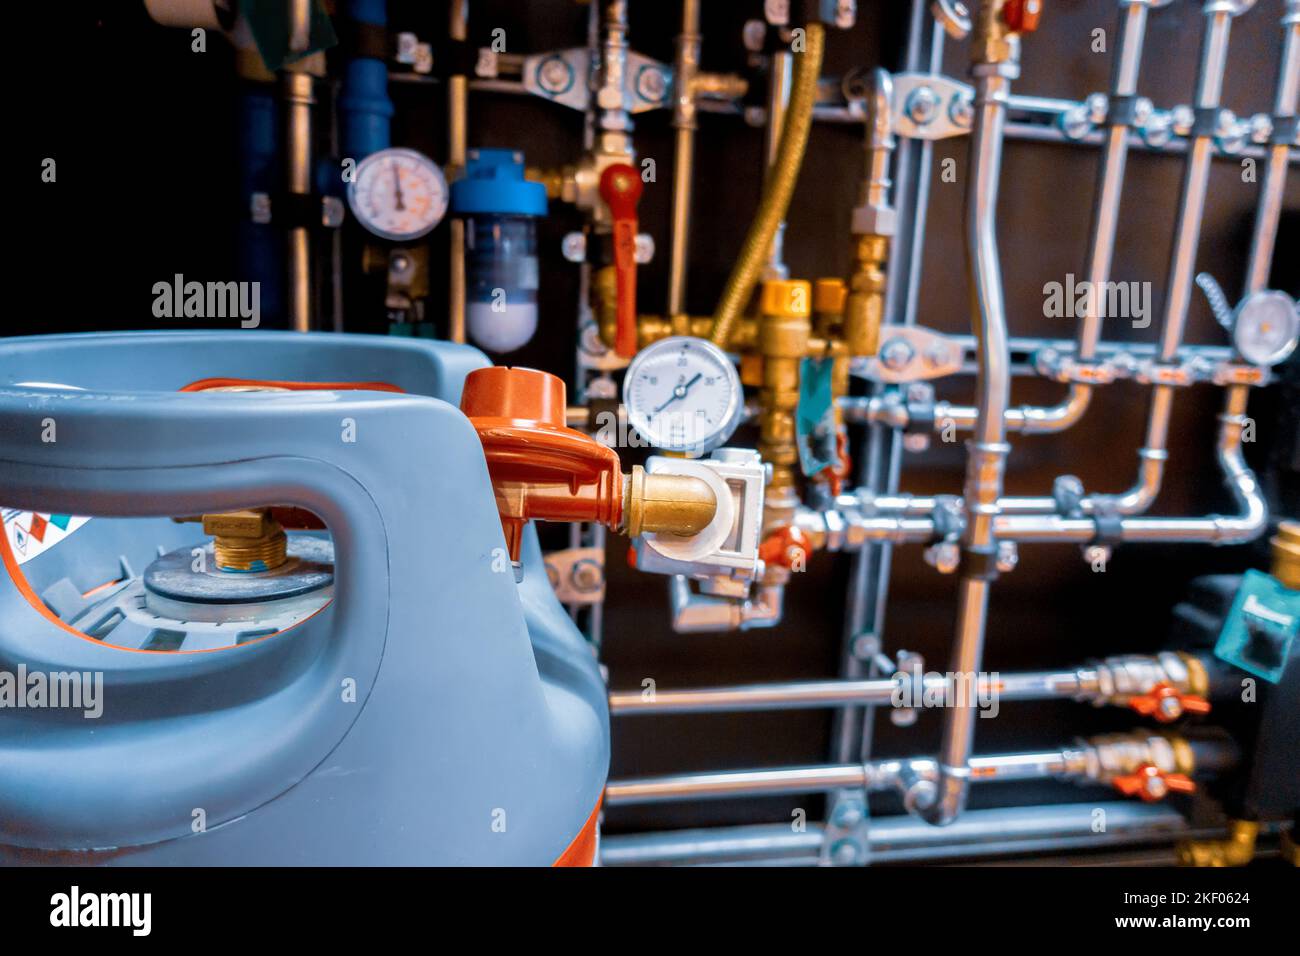 Connection system for heating boiler and other water and heating equipment. Stock Photo